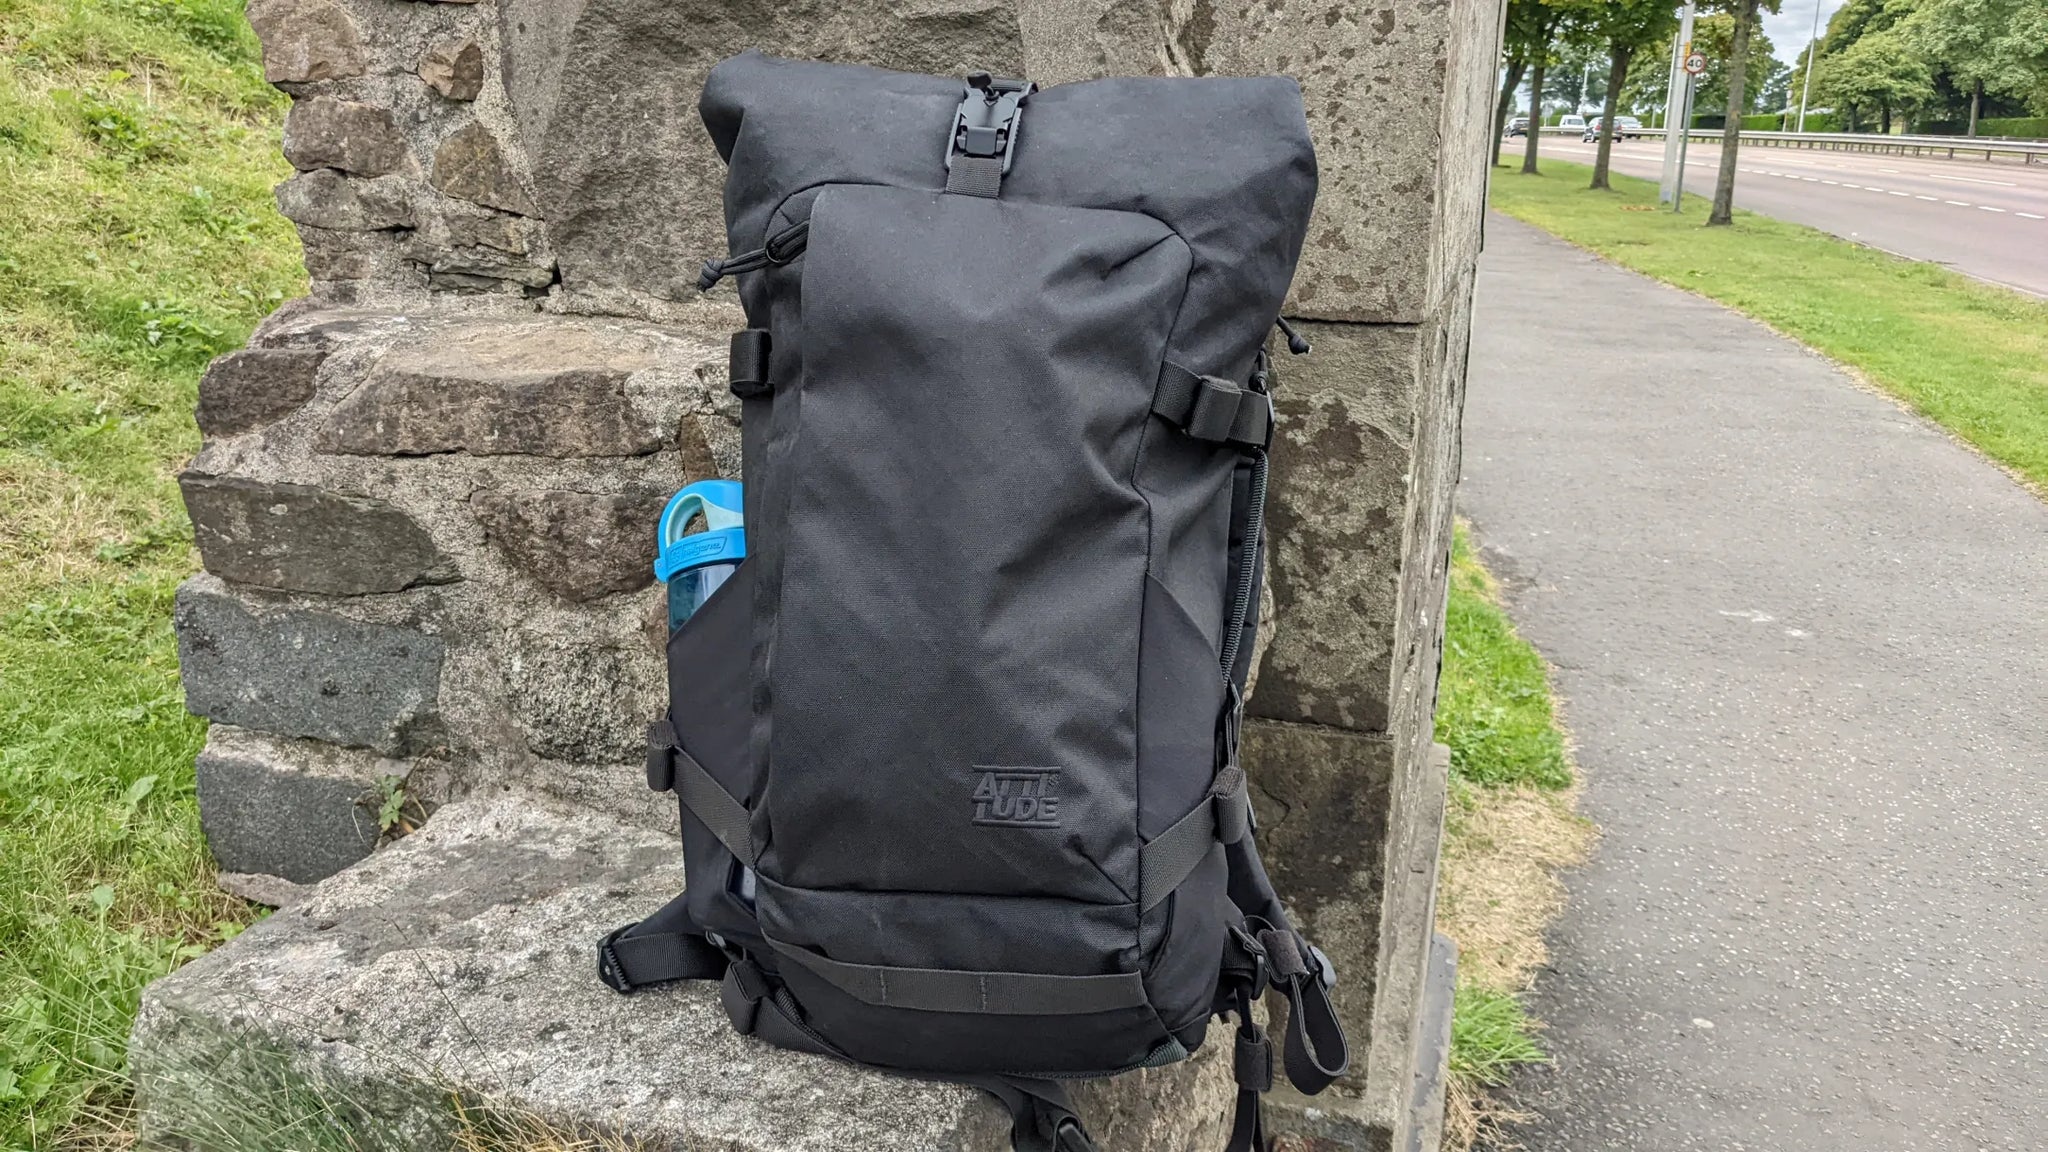 ATD2 backpack review and Q&A session with theperfectpack.com